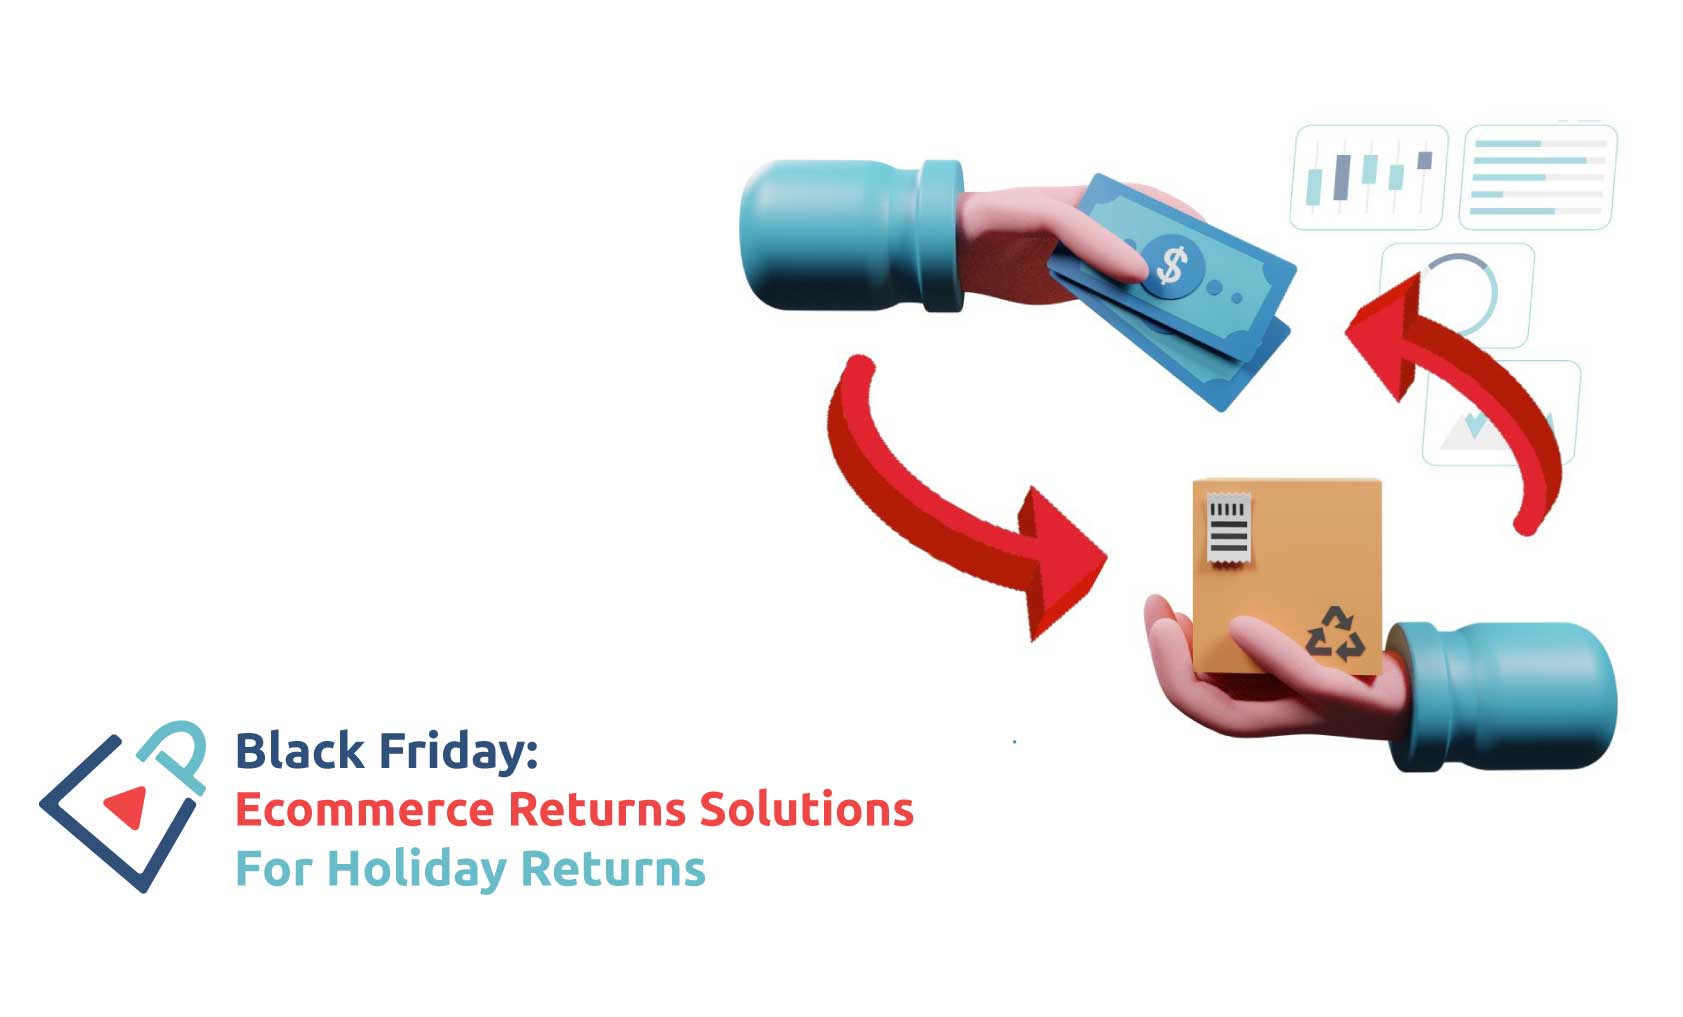 Ecommerce returns solutions for Black Friday holiday shopping season